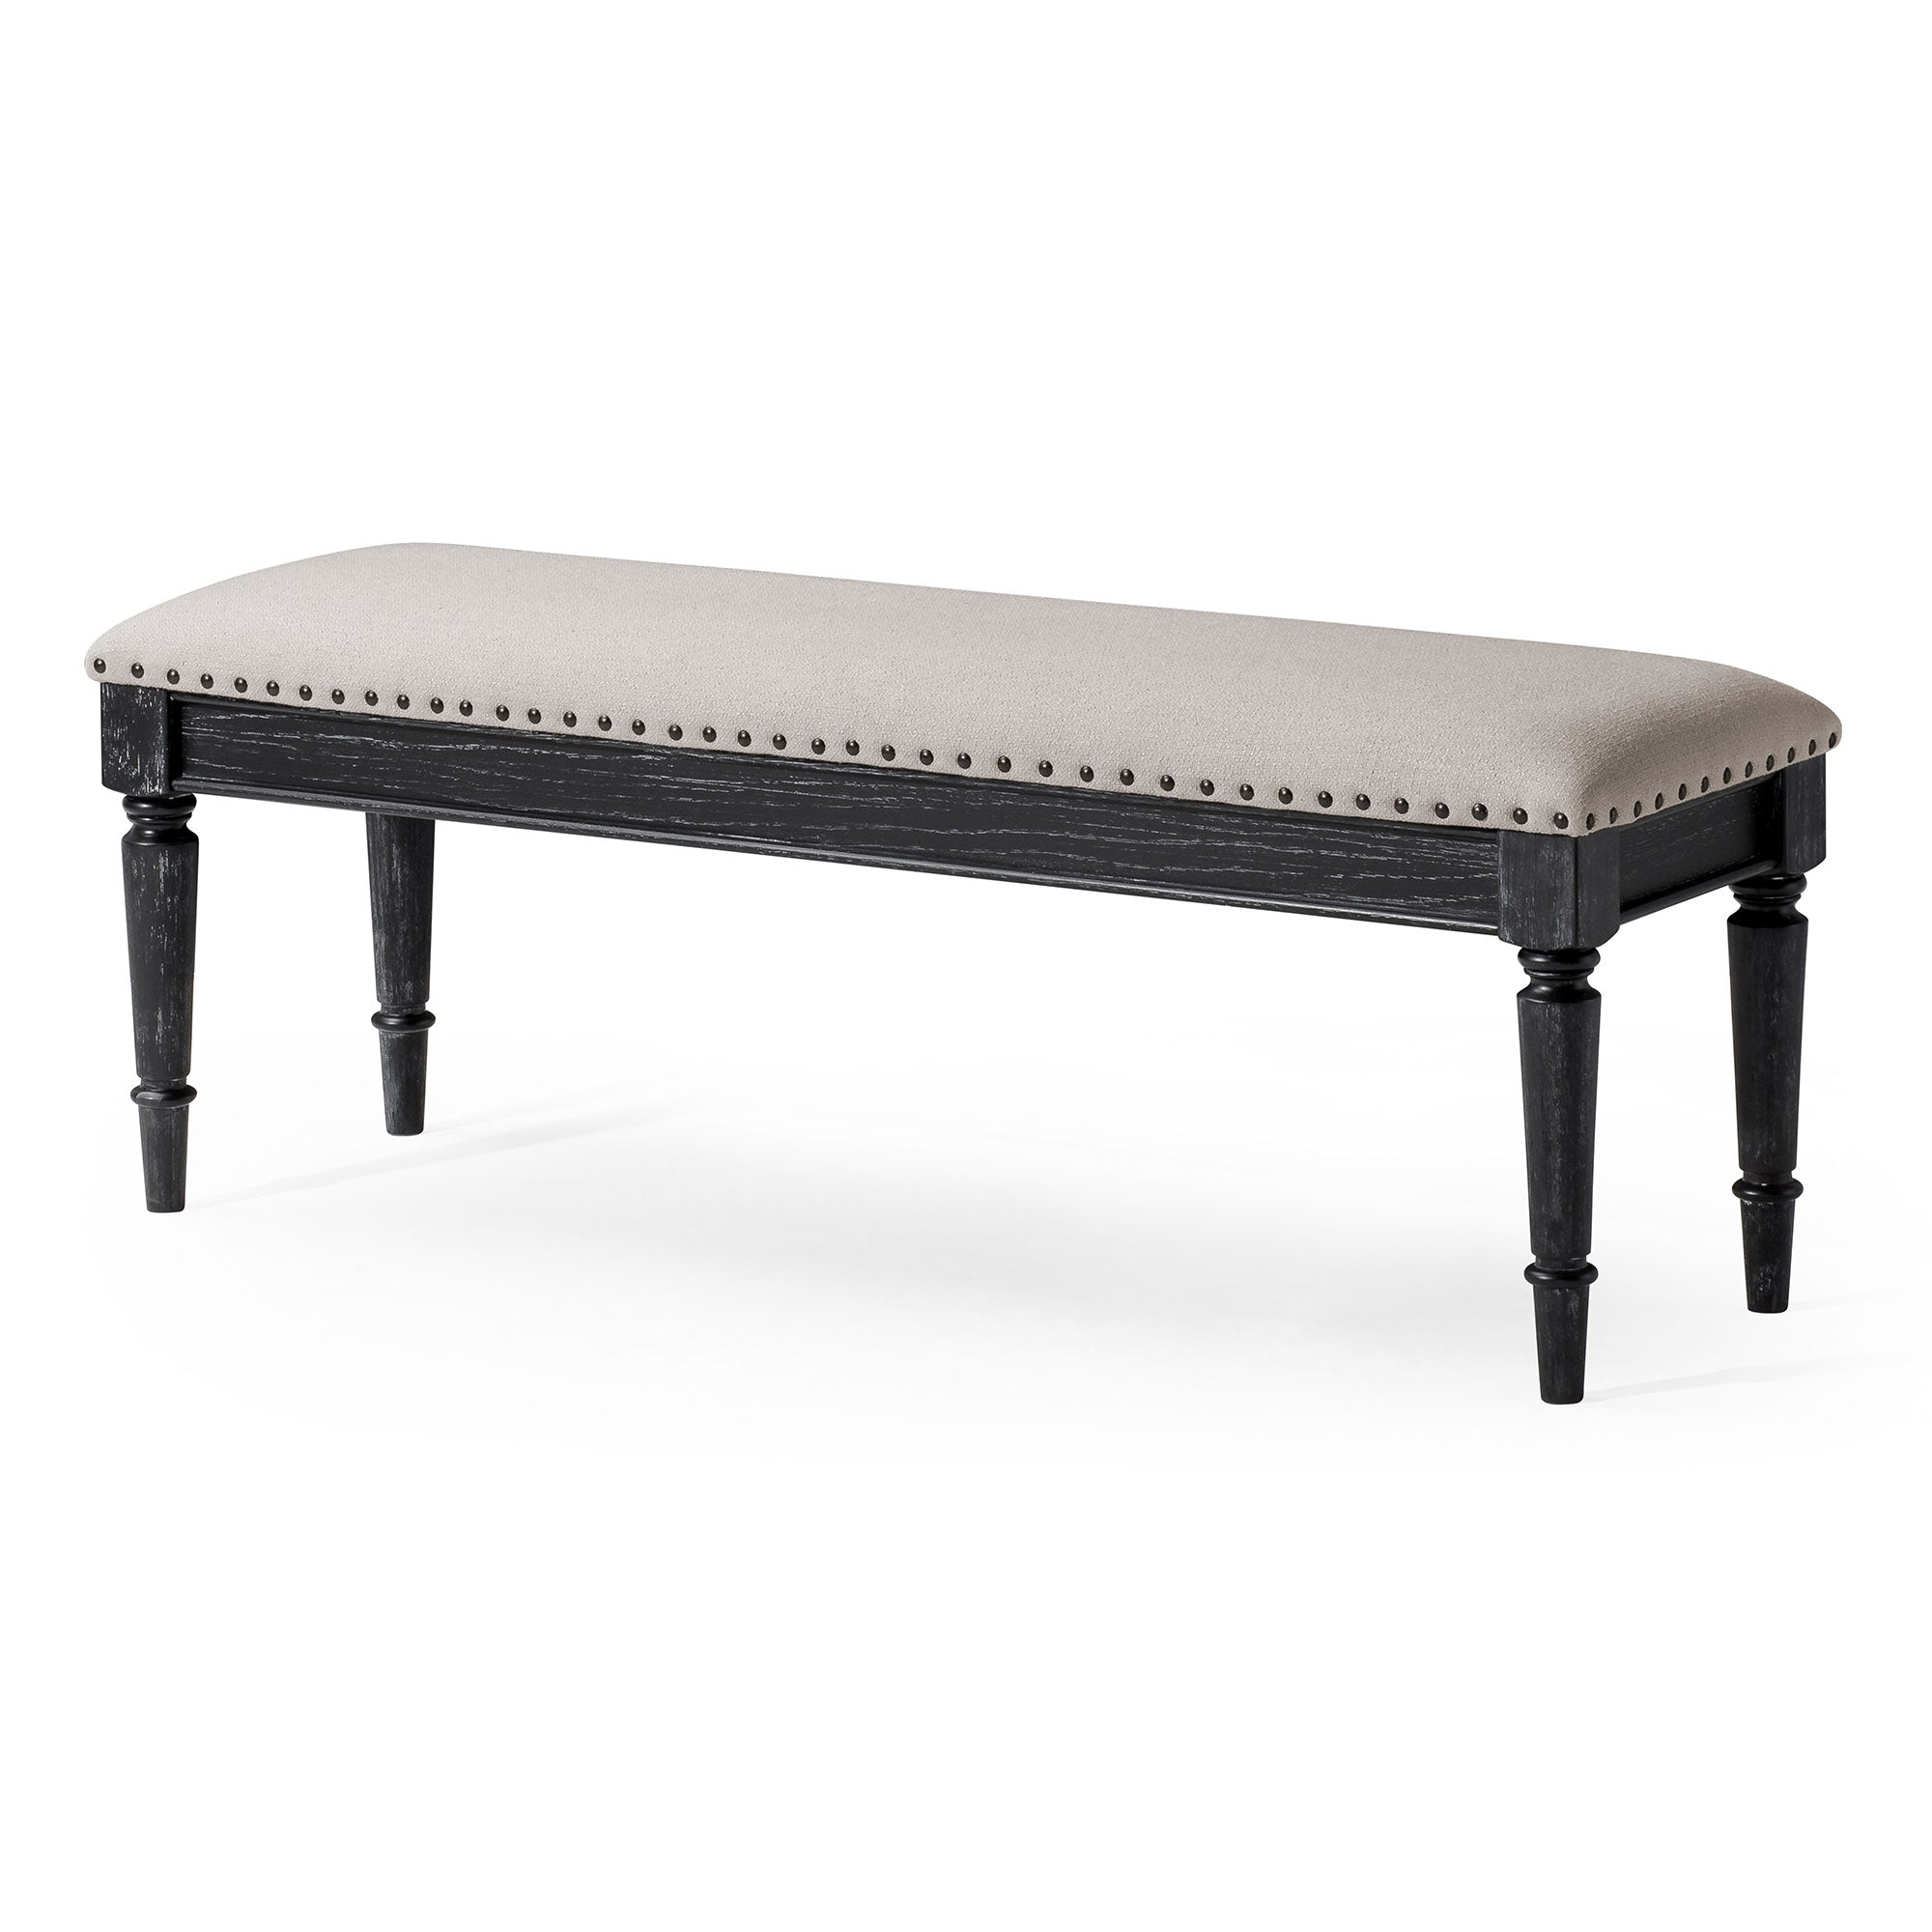 Elizabeth Classical Upholstered Wooden Bench in Antiqued Black Finish in Ottomans & Benches by Maven Lane